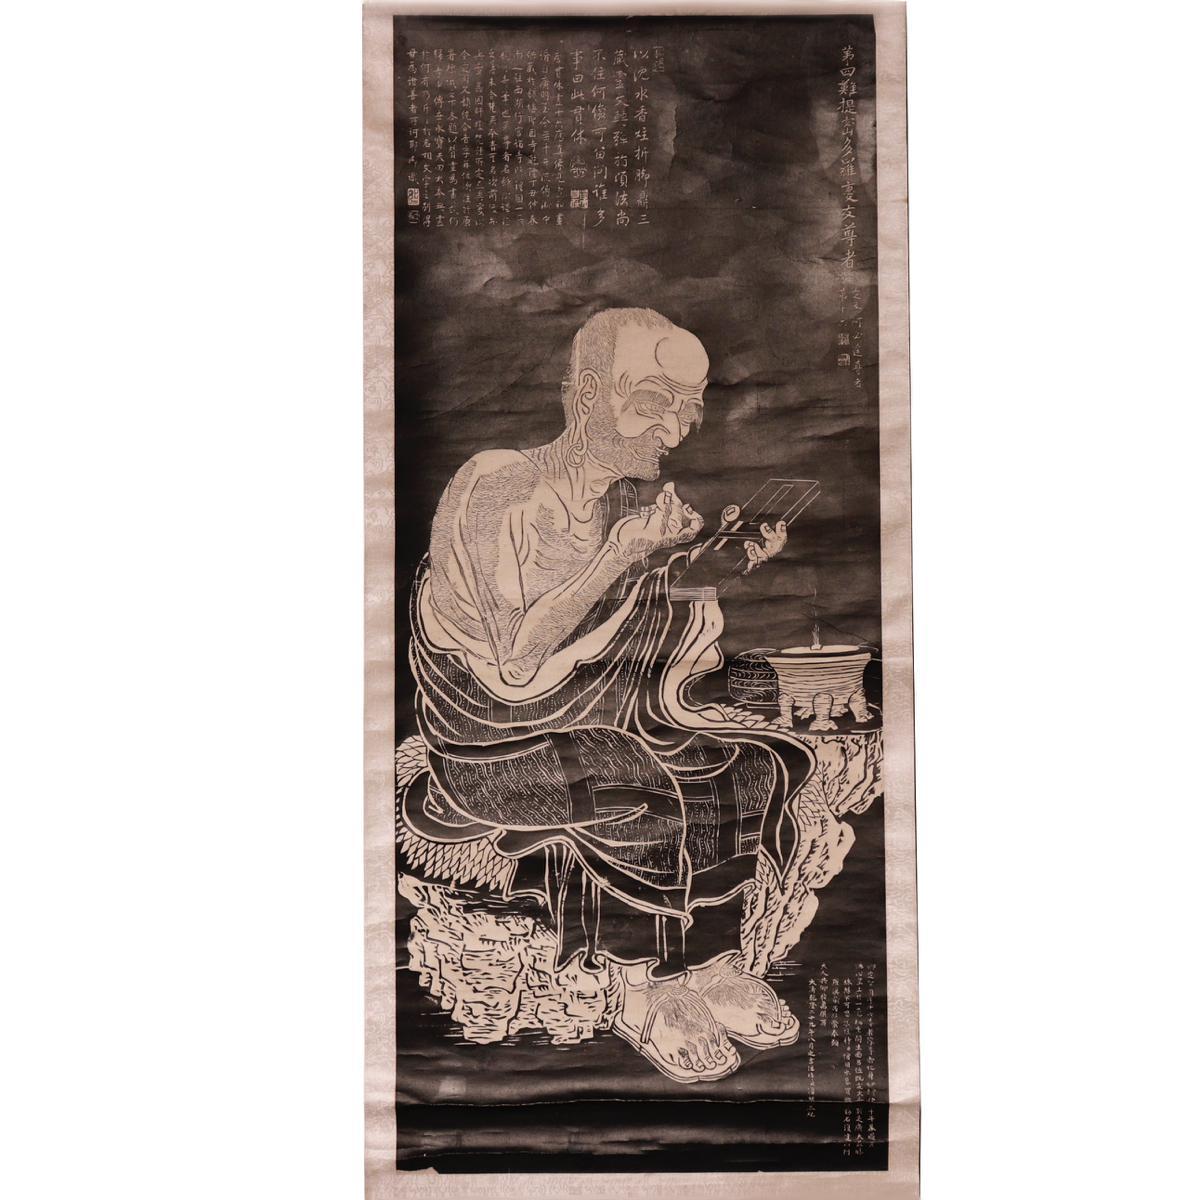 Chinese ink rubbing depicting Panthaka Arhat, no.4 of the 16 arhat images once immortalized in stone at the former stupa at Shengyin Temple. Depicted here sitting on a rock with a book in his left hand and snapping his fingers in his right hand,